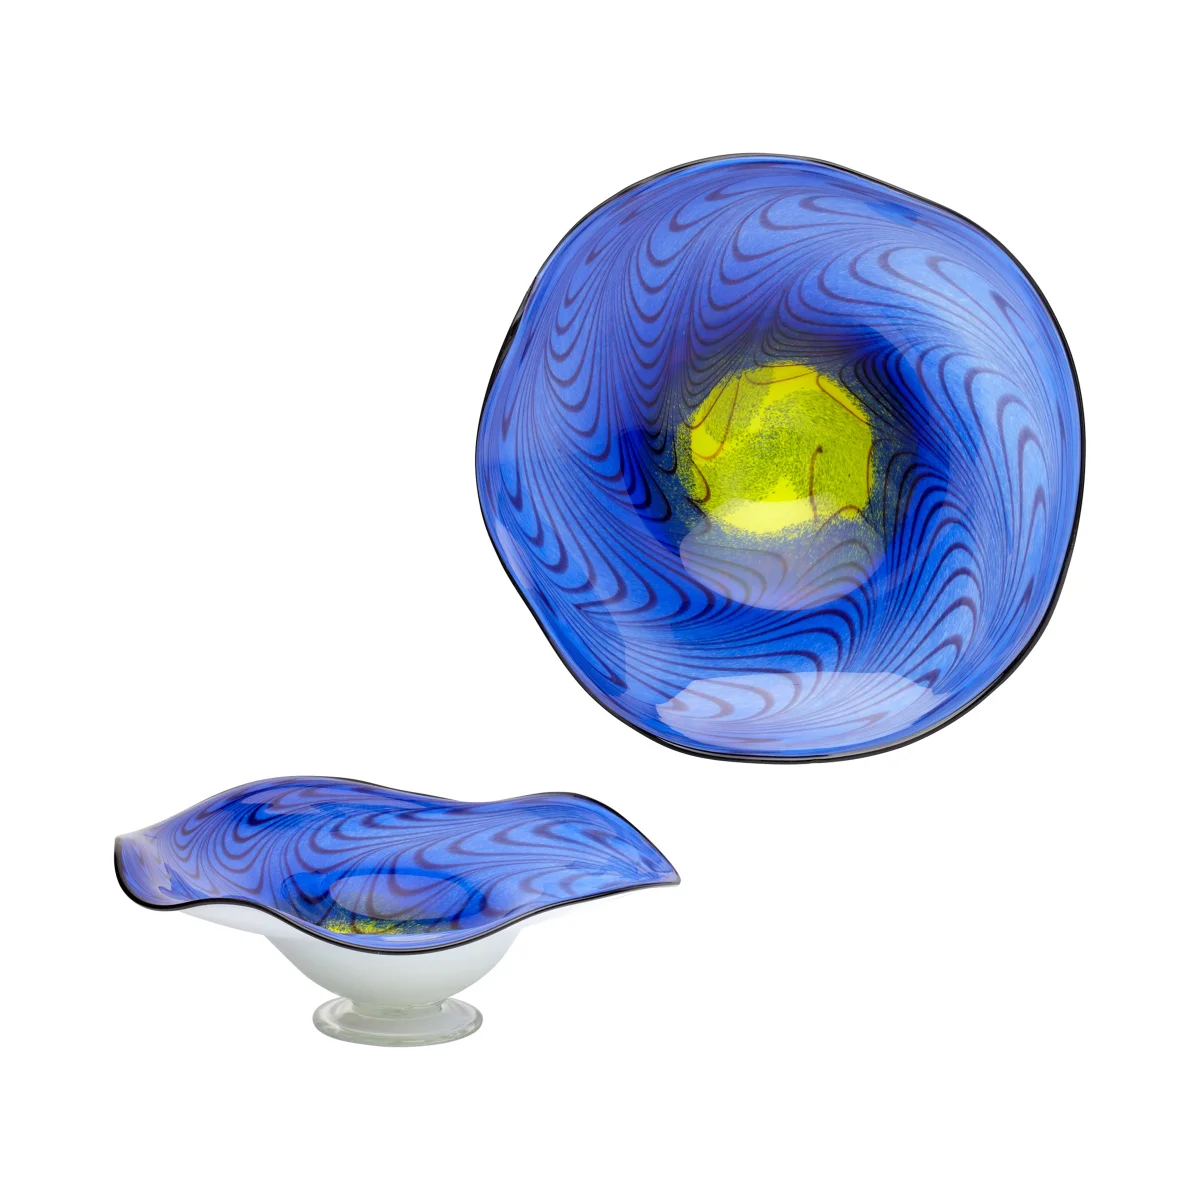 Cobalt blue swirls to a pool of inviting yellow. A stunning large art glass bowl brings exceptional decorative appeal to a dining table or sideboard. Add a splash of color and artistry. Artisan Produced: This product, or portions of this product have been hand crafted by artisans. Each piece is unique and can vary in finish, tone, texture and color. Qty Available: 43 Dimensions: L 19.75 X W 19.75 X H 7.50 Weight: 23 lbs. Finish: Cobalt Blue Materials: Glass